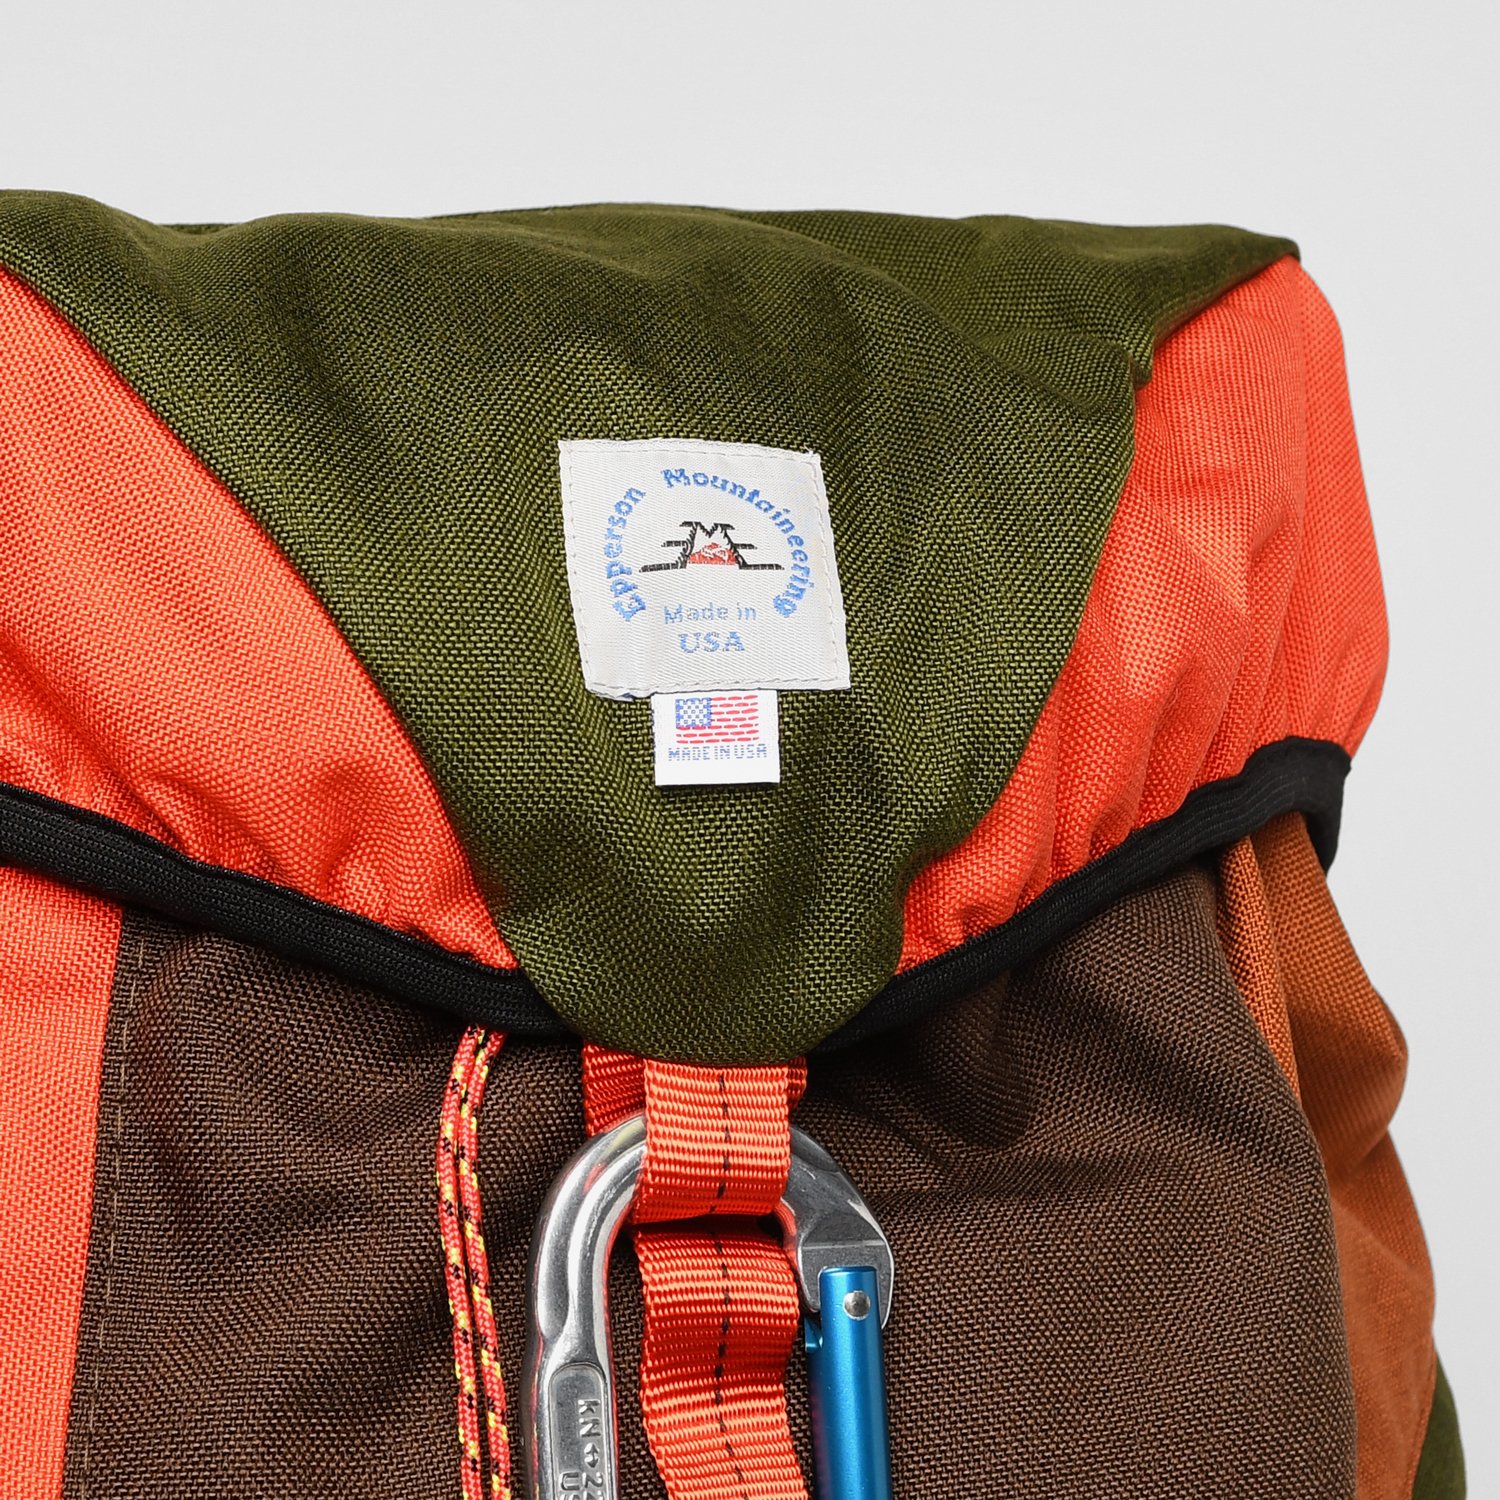 Large Climb Pack - Moss / Coffee — Epperson Mountaineering